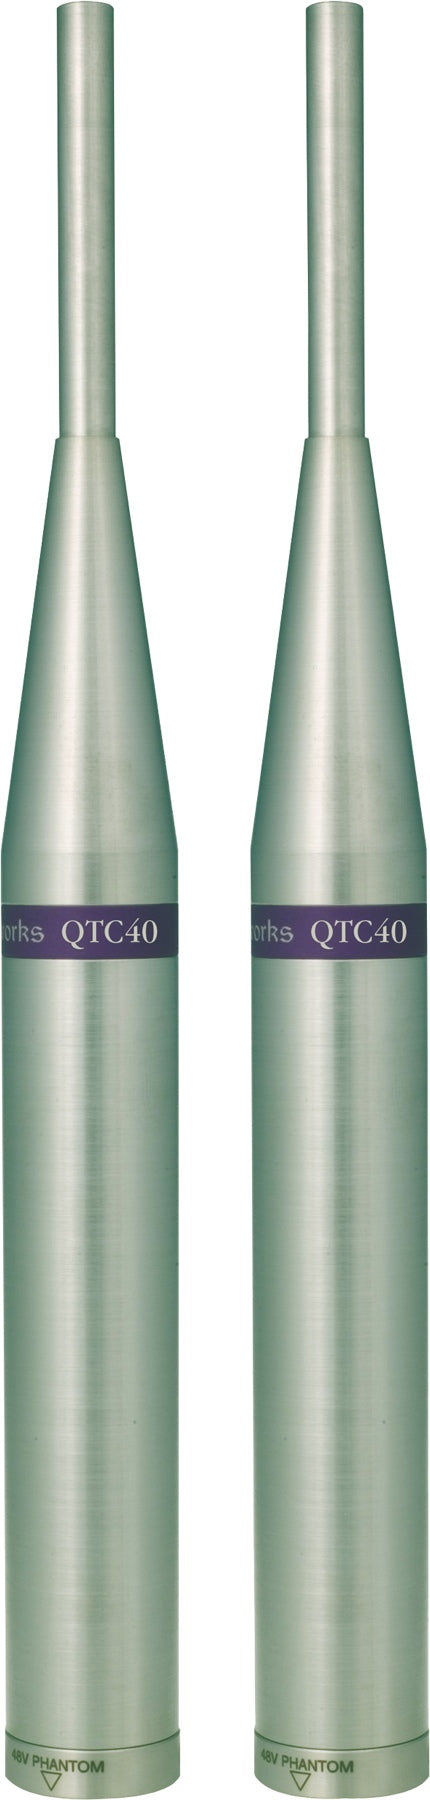 Earthworks QTC40-MP Quiet Time Coherent Series Microphone Matched Pair